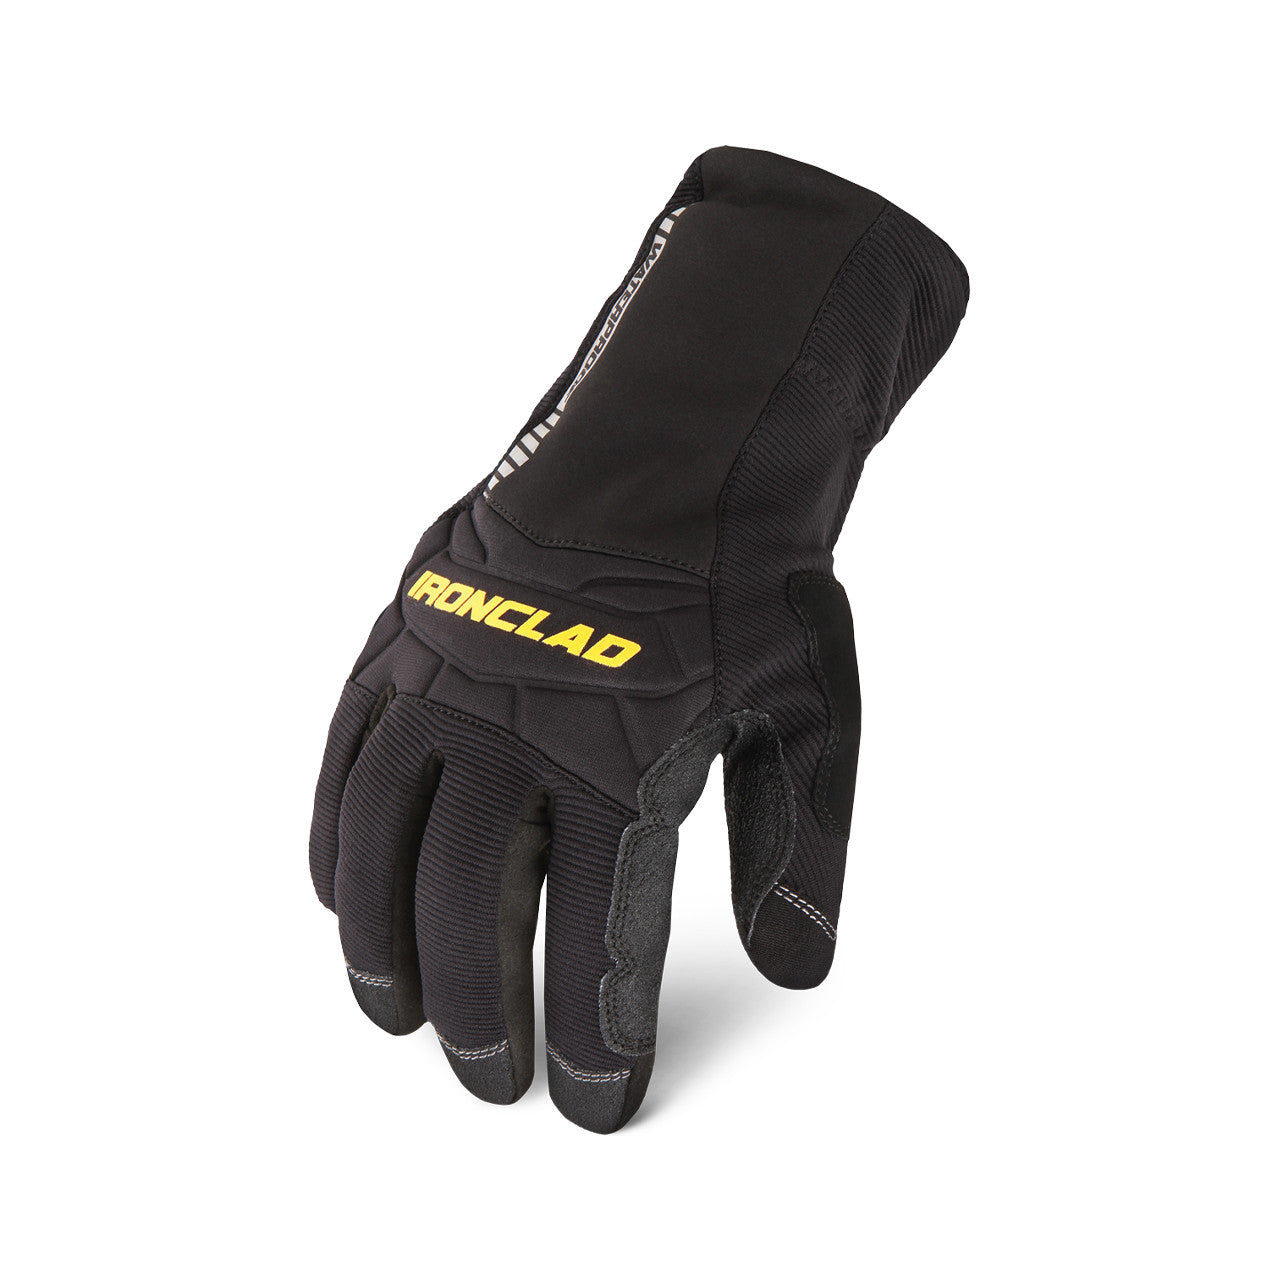 Ironclad Cold Condition® Waterproof Glove Black-eSafety Supplies, Inc